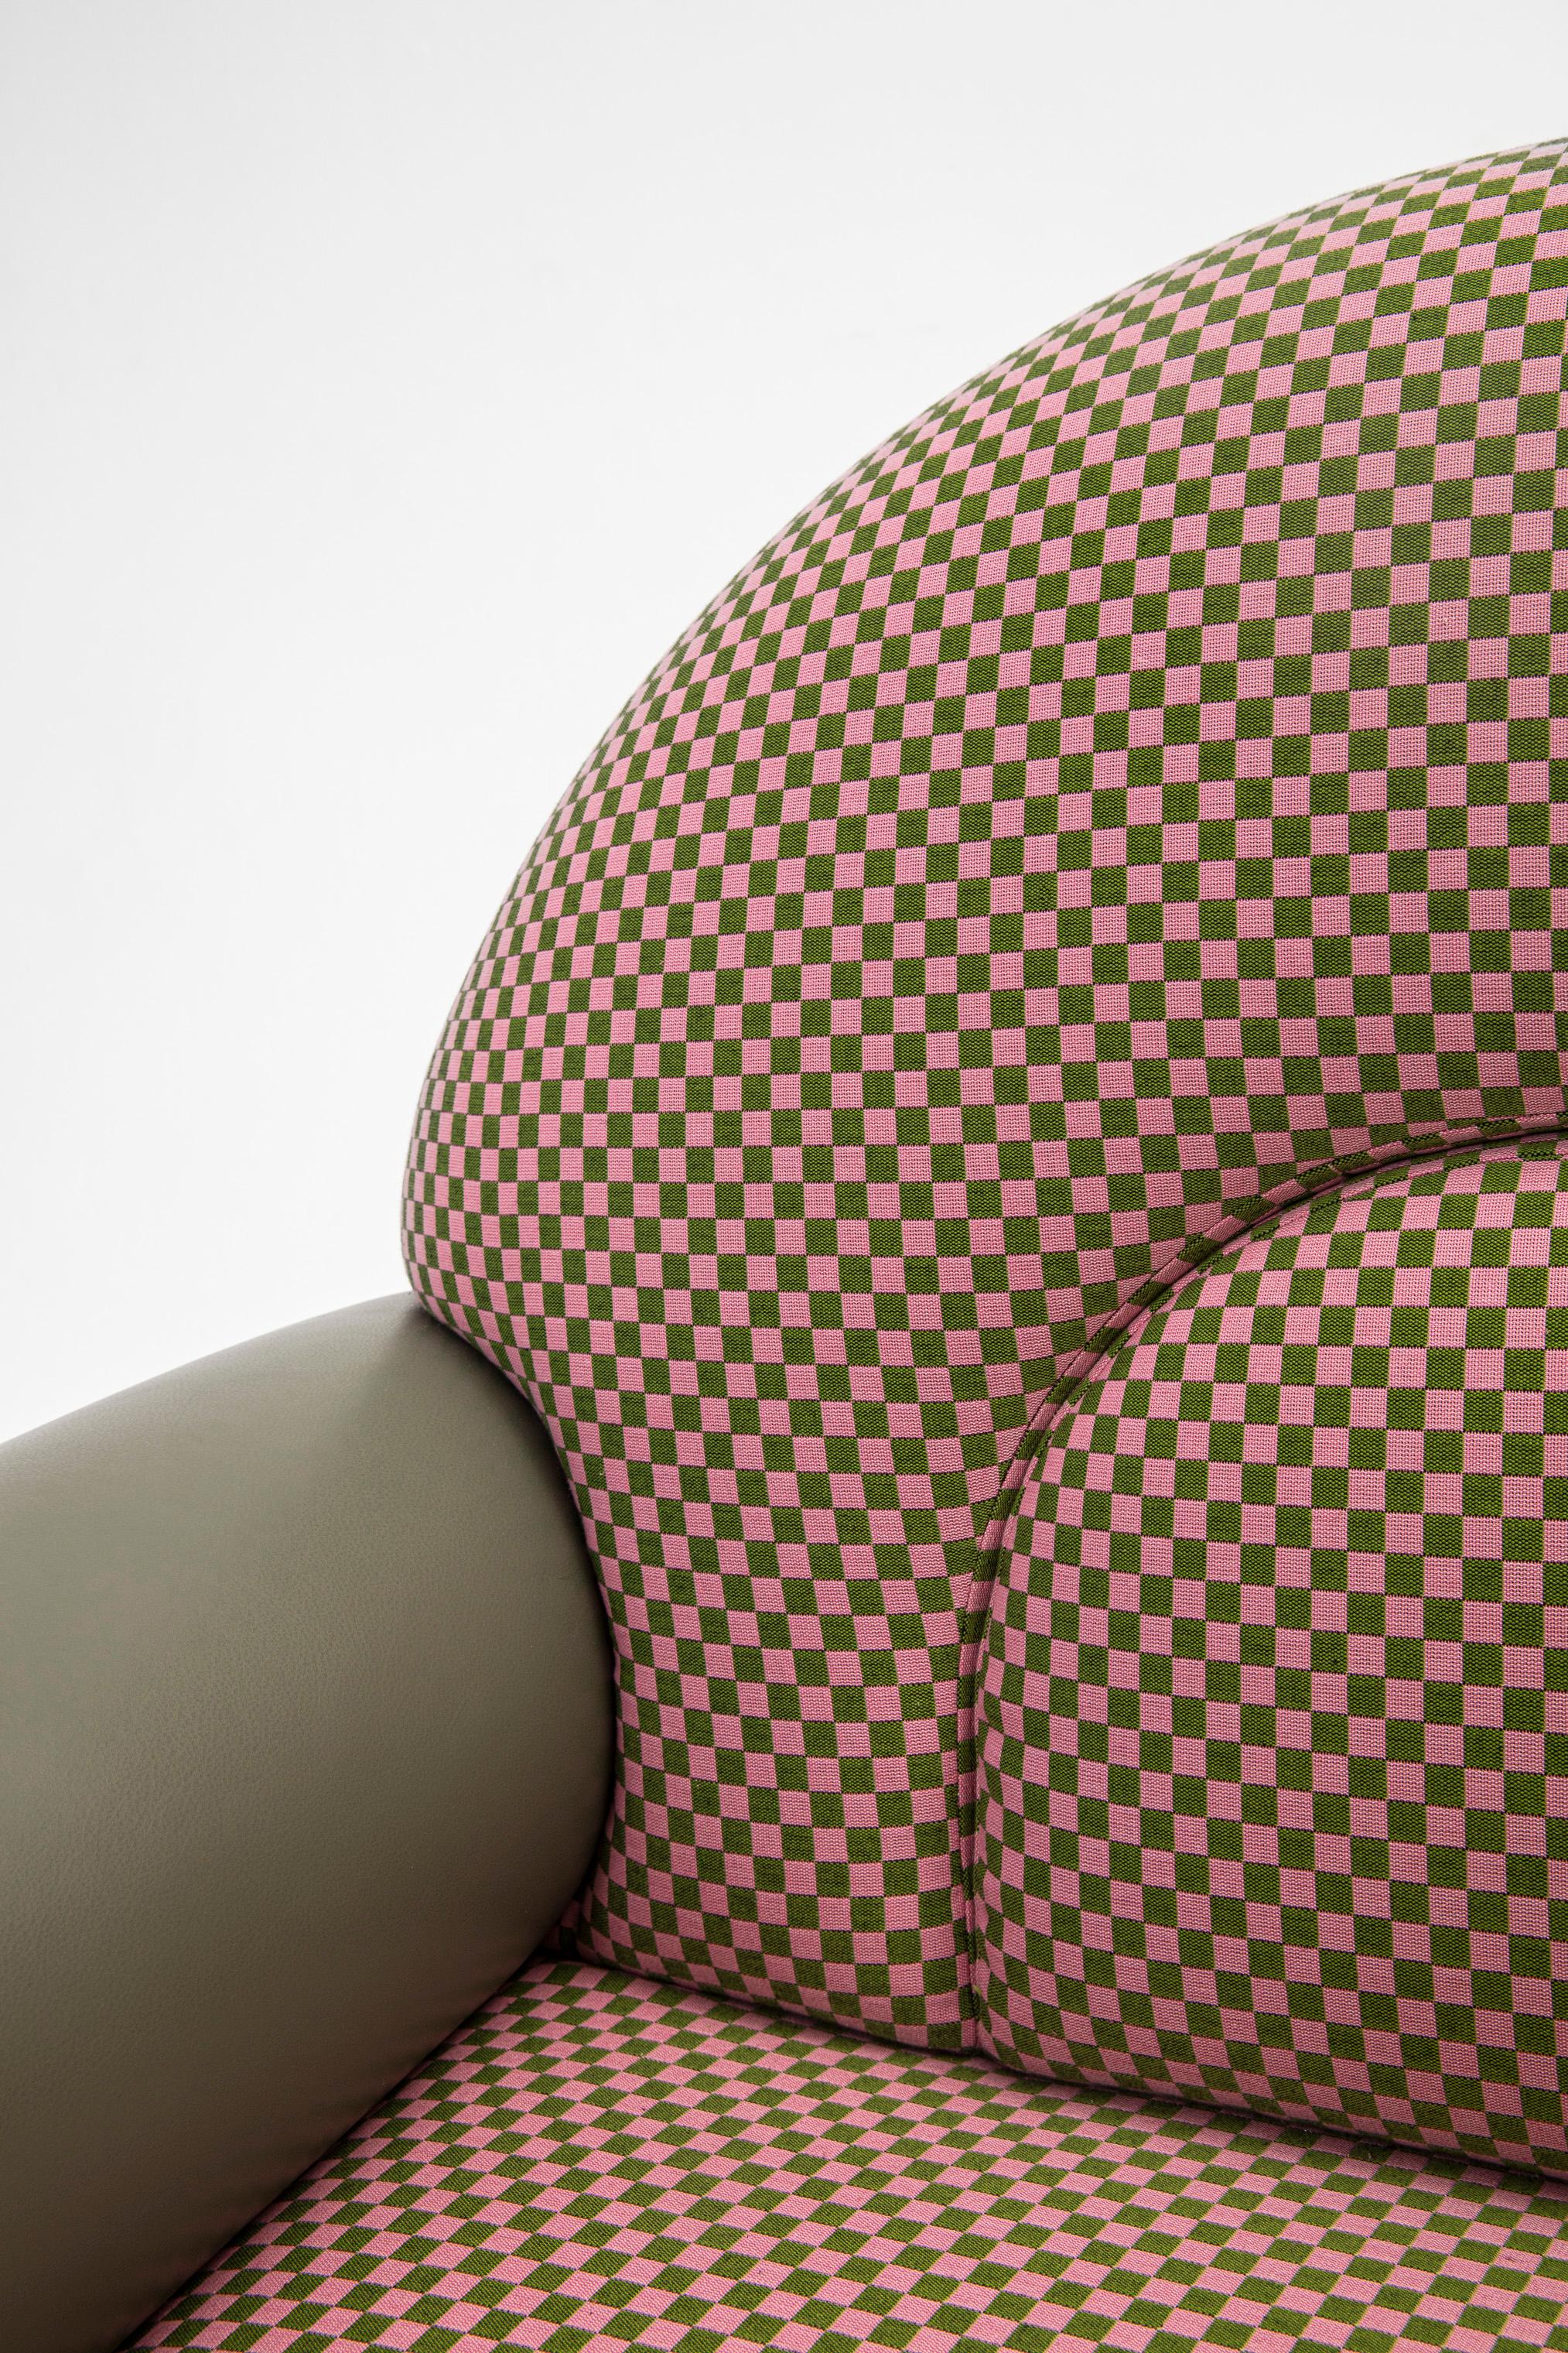 N-Gene Armchair with Cherry Checker Fabric and Olive Leather In New Condition For Sale In New York, NY